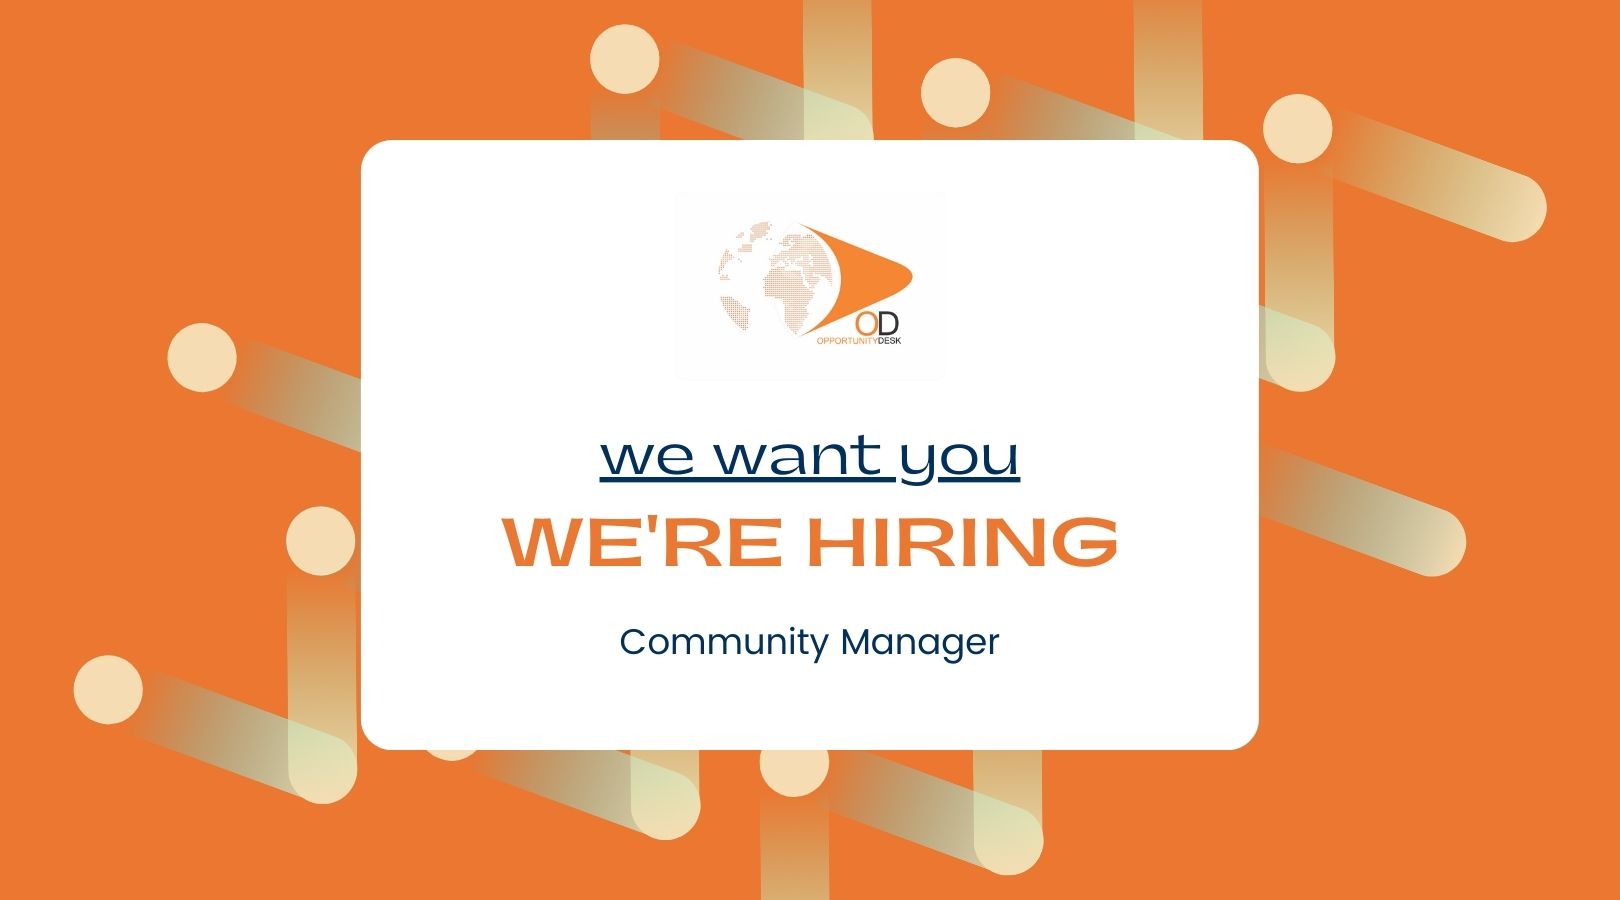 Opportunity Desk is hiring a Community Manager